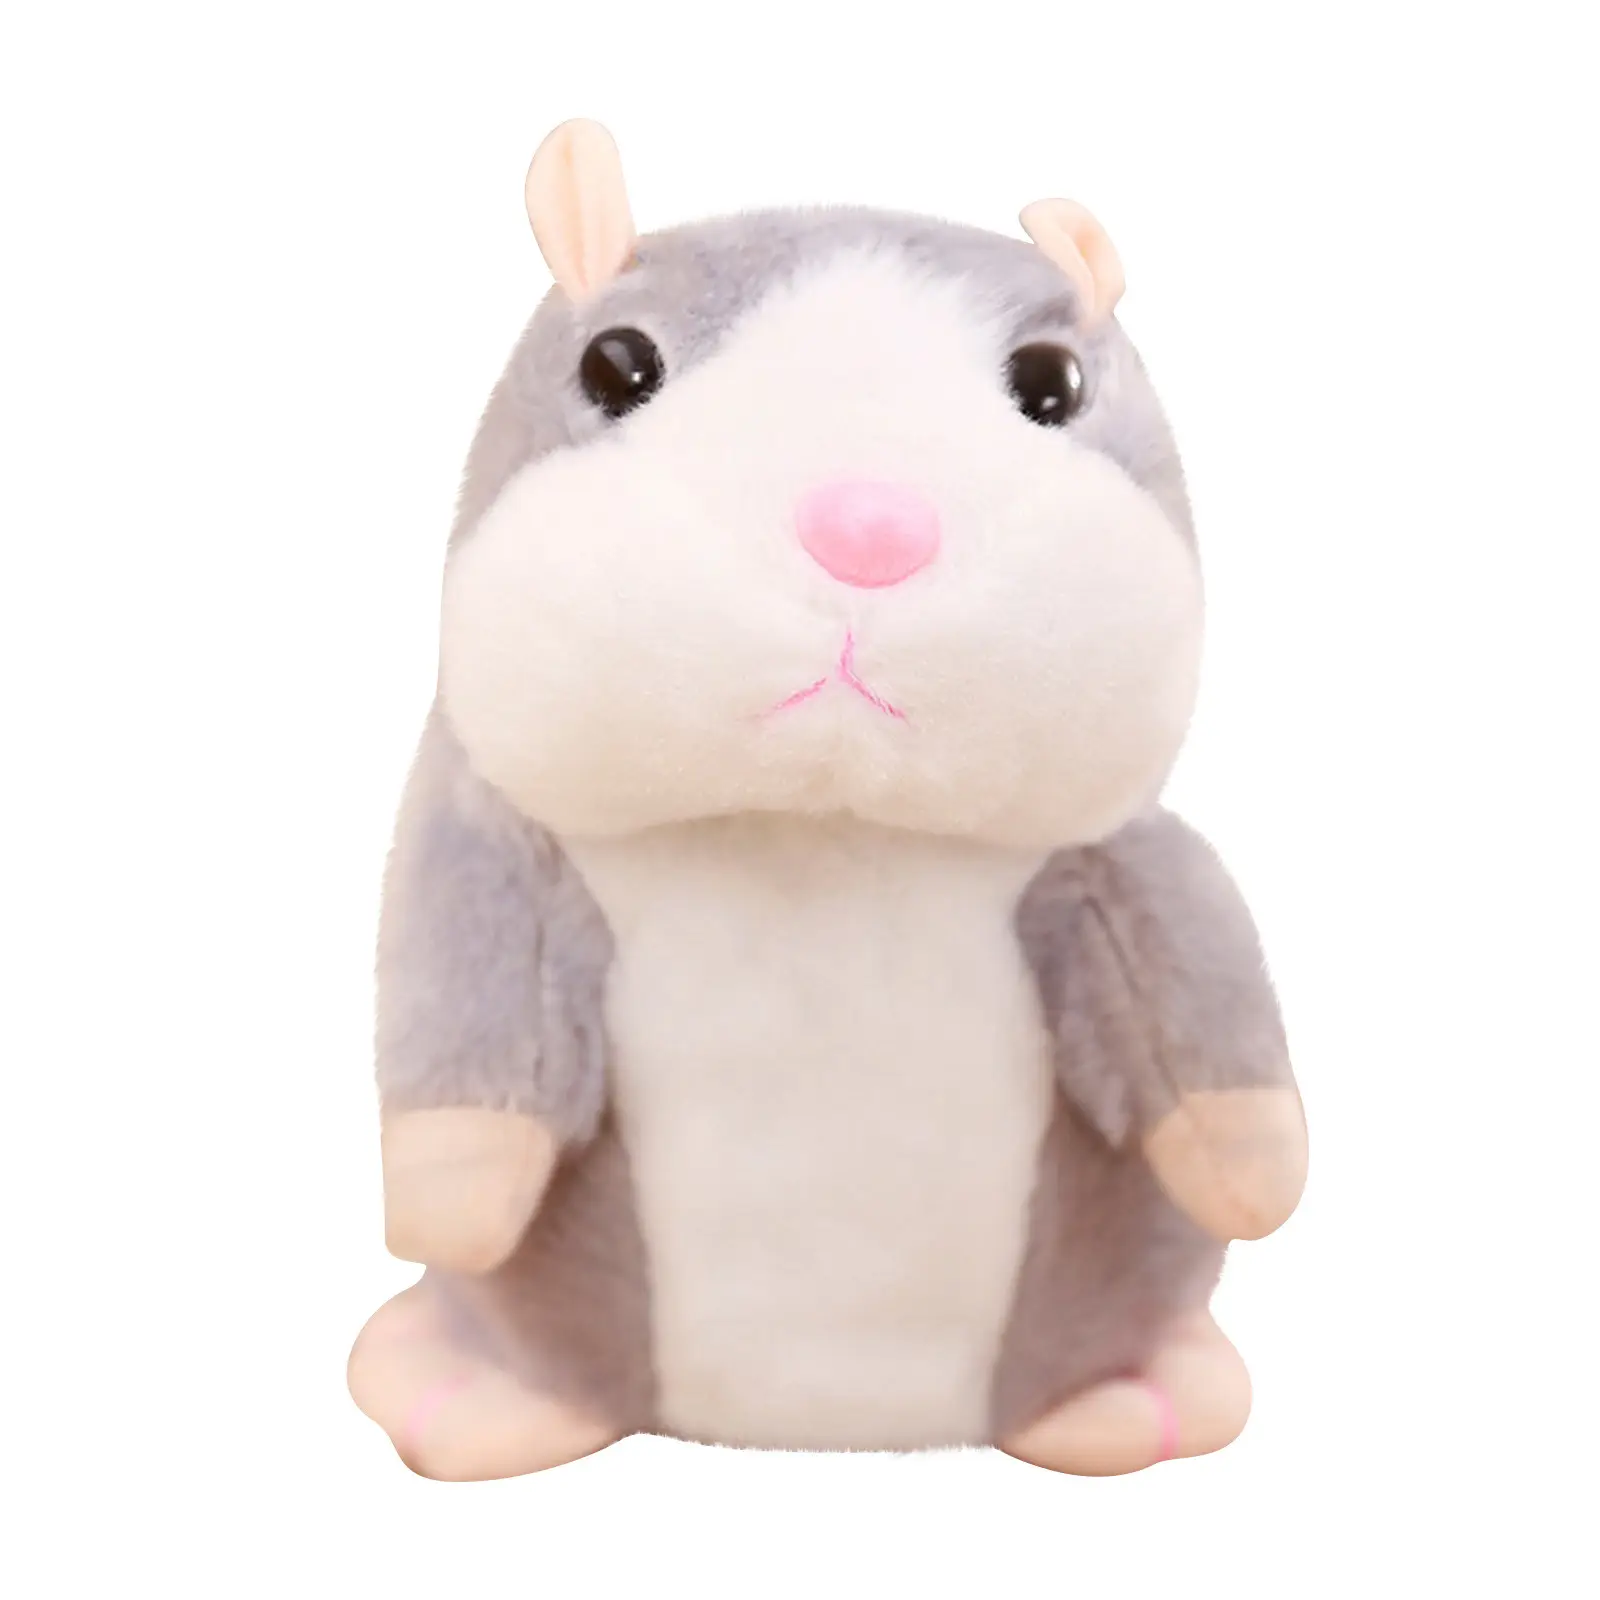 Kids Talking Hamster Mouse Pet Toy Plush Hot Cute Speak Talking Sound Record Hamster Educational Toy for Children Gifts 15 cm